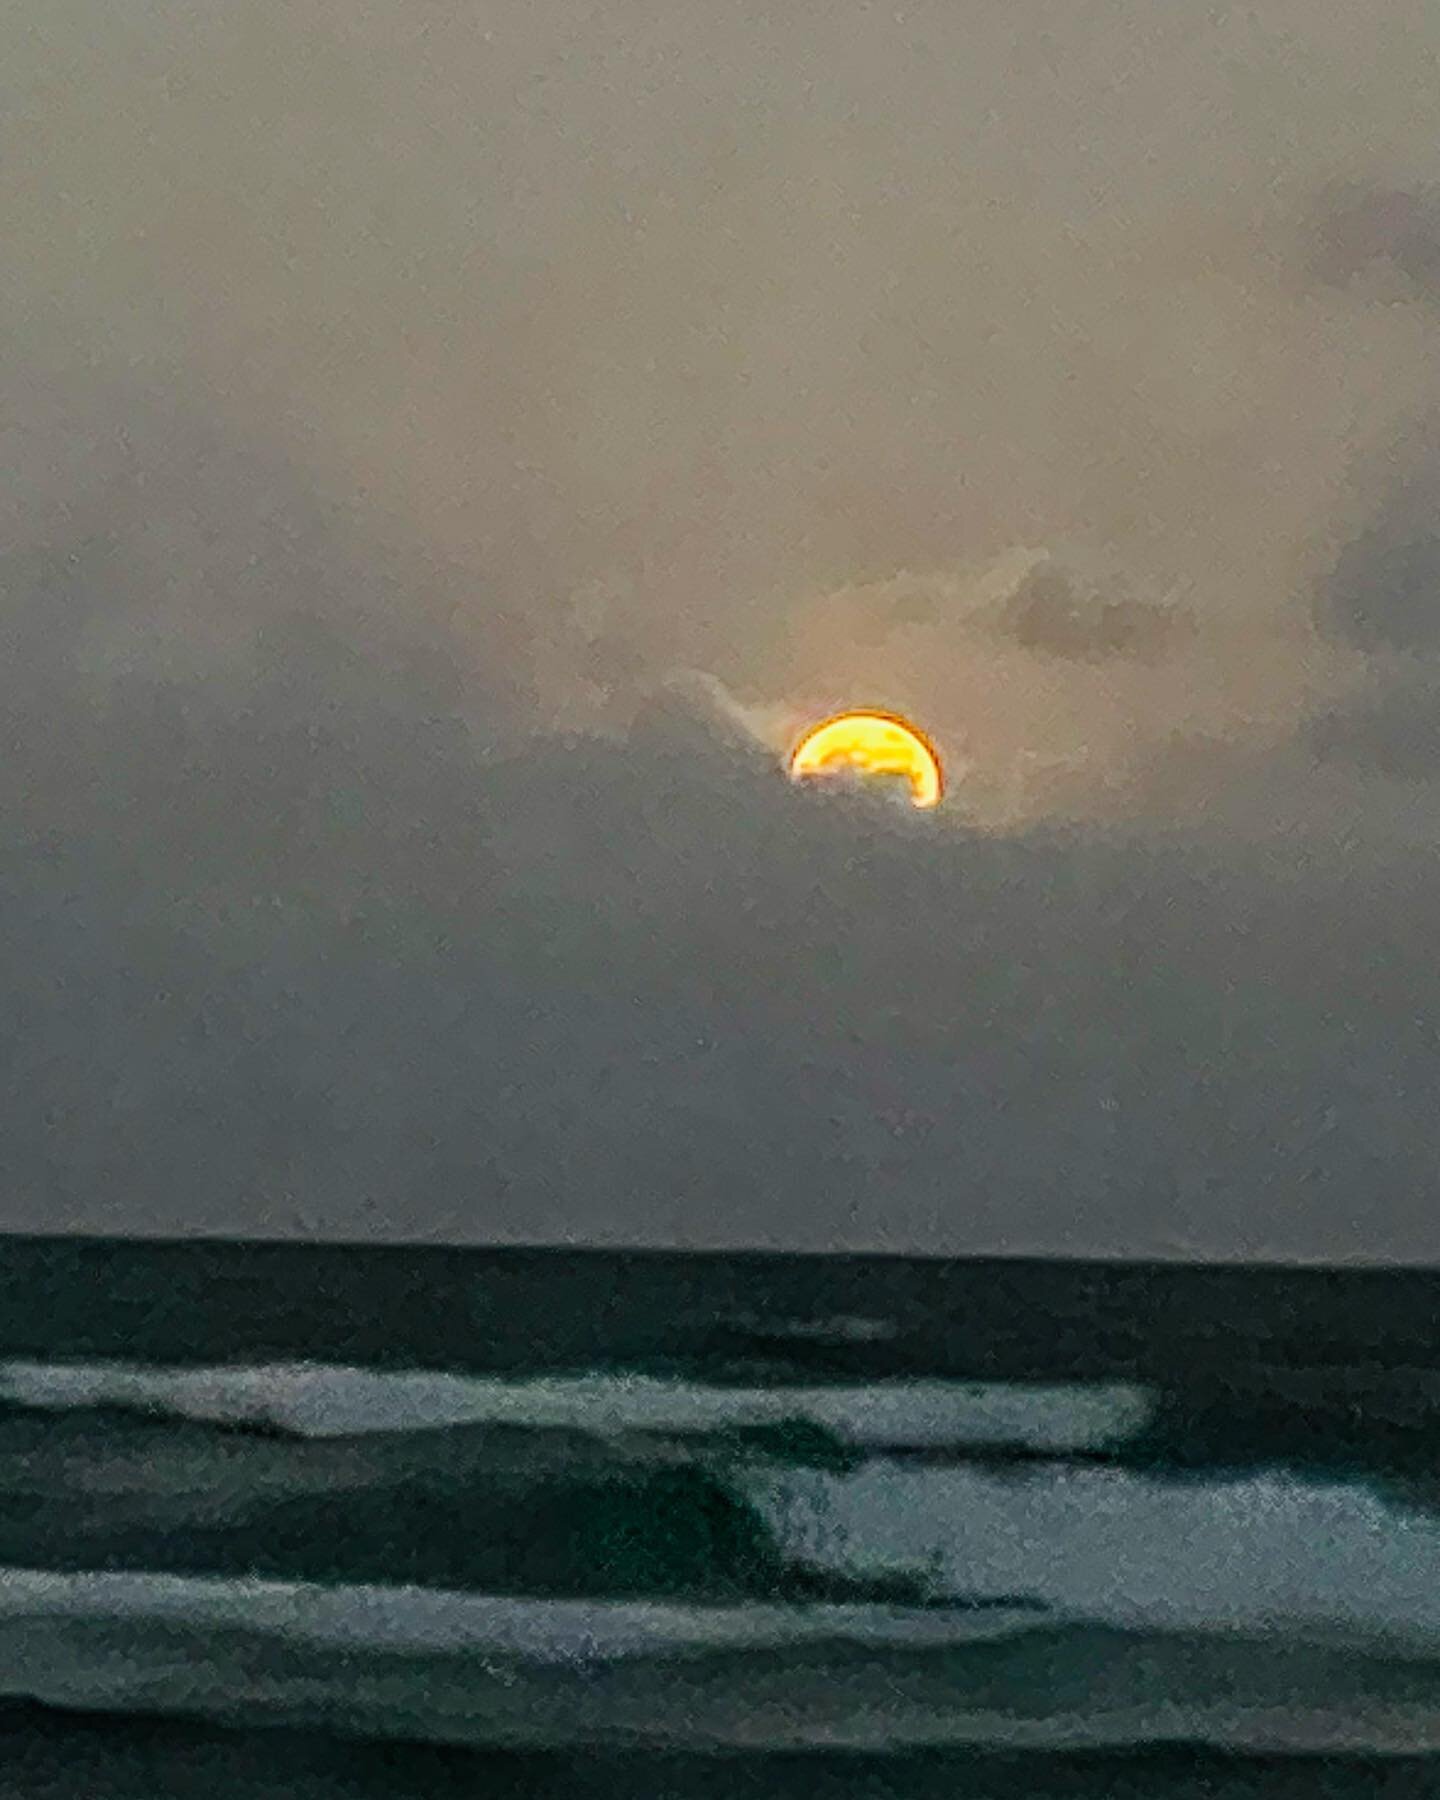 Full blue supermoon in Pisces, rising over the ocean this evening. Can you spot Saturn in one of the photos? 

#fullmooninpisces #augustsupermoon #moonlightoverthewater